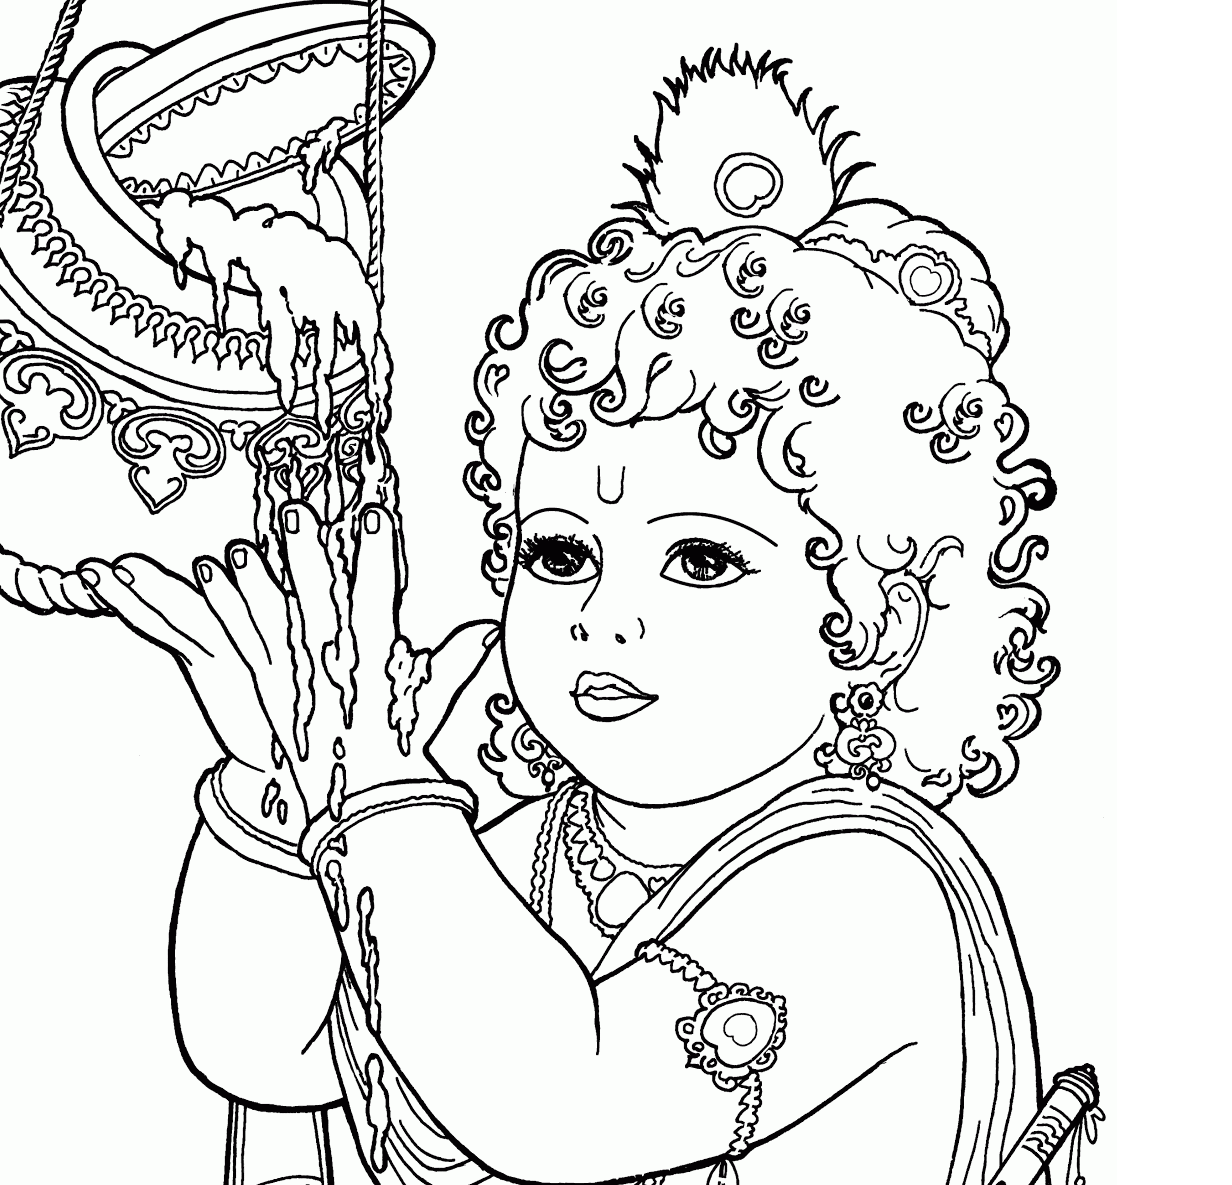 lord krishna colouring pages - Clip Art Library